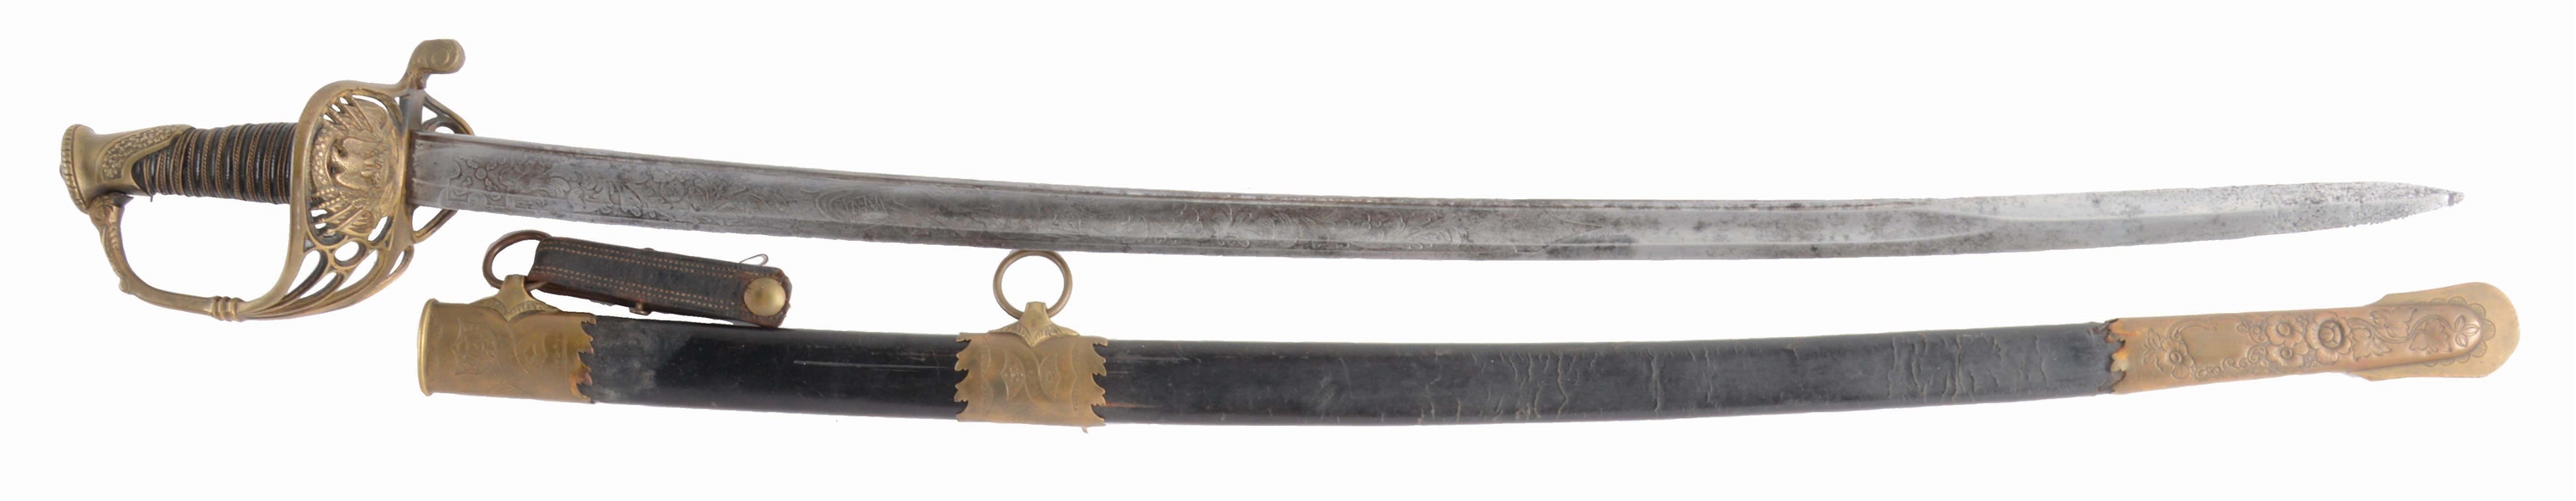 AN 1850 FOOT OFFICERS SABER, IMPORTED AND RETAILED BY H. SAUERBIER, NEWARK, NEW JERSEY.